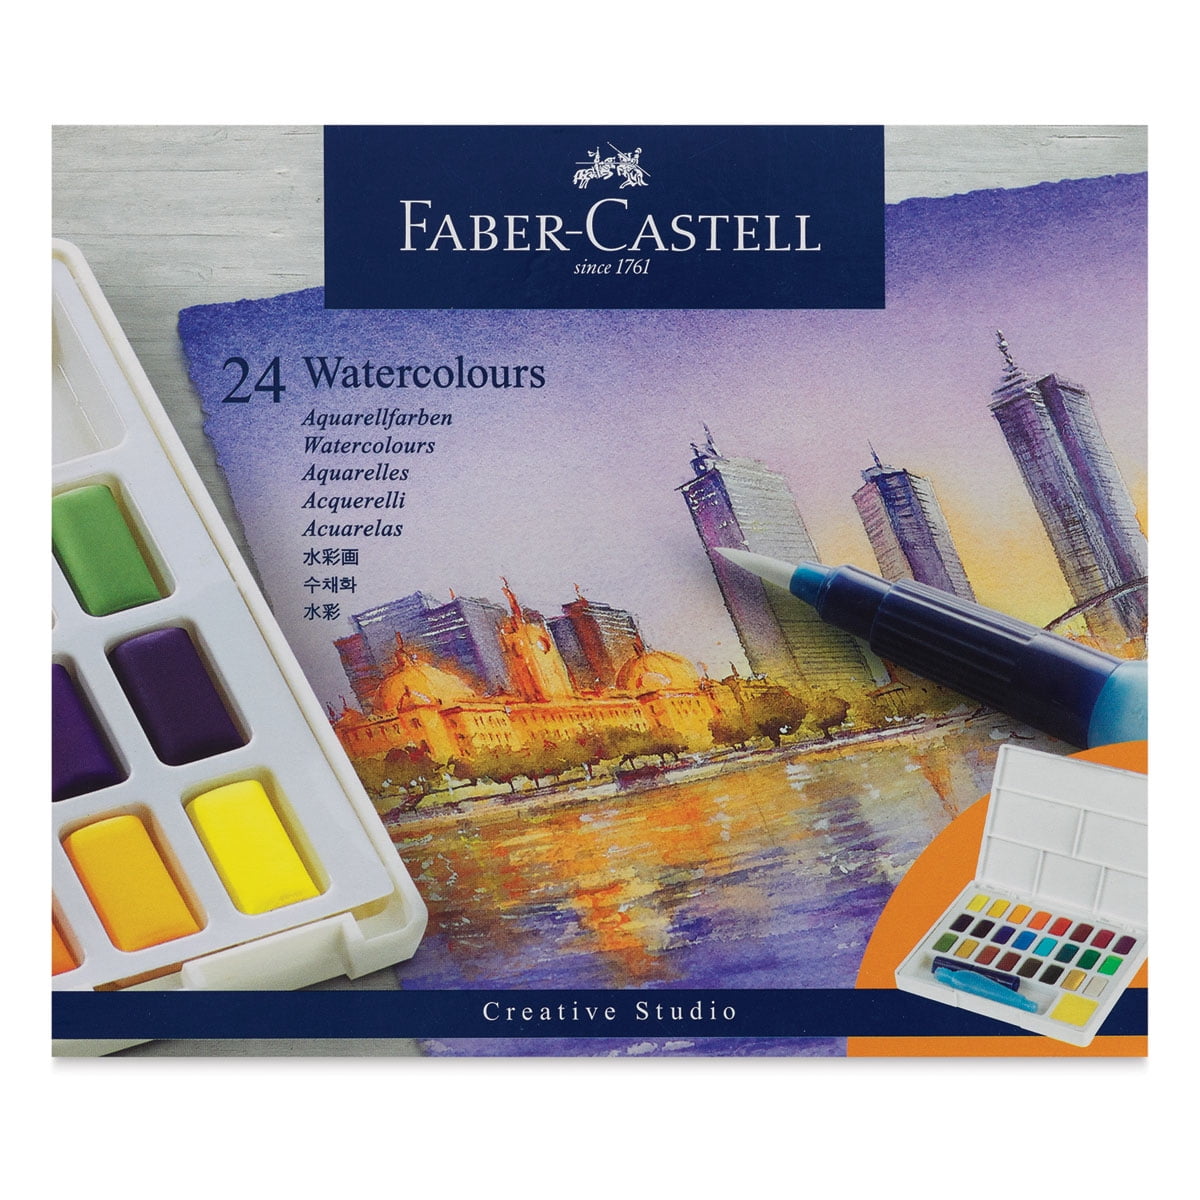 Faber-Castell Watercolor Pan Set of 24